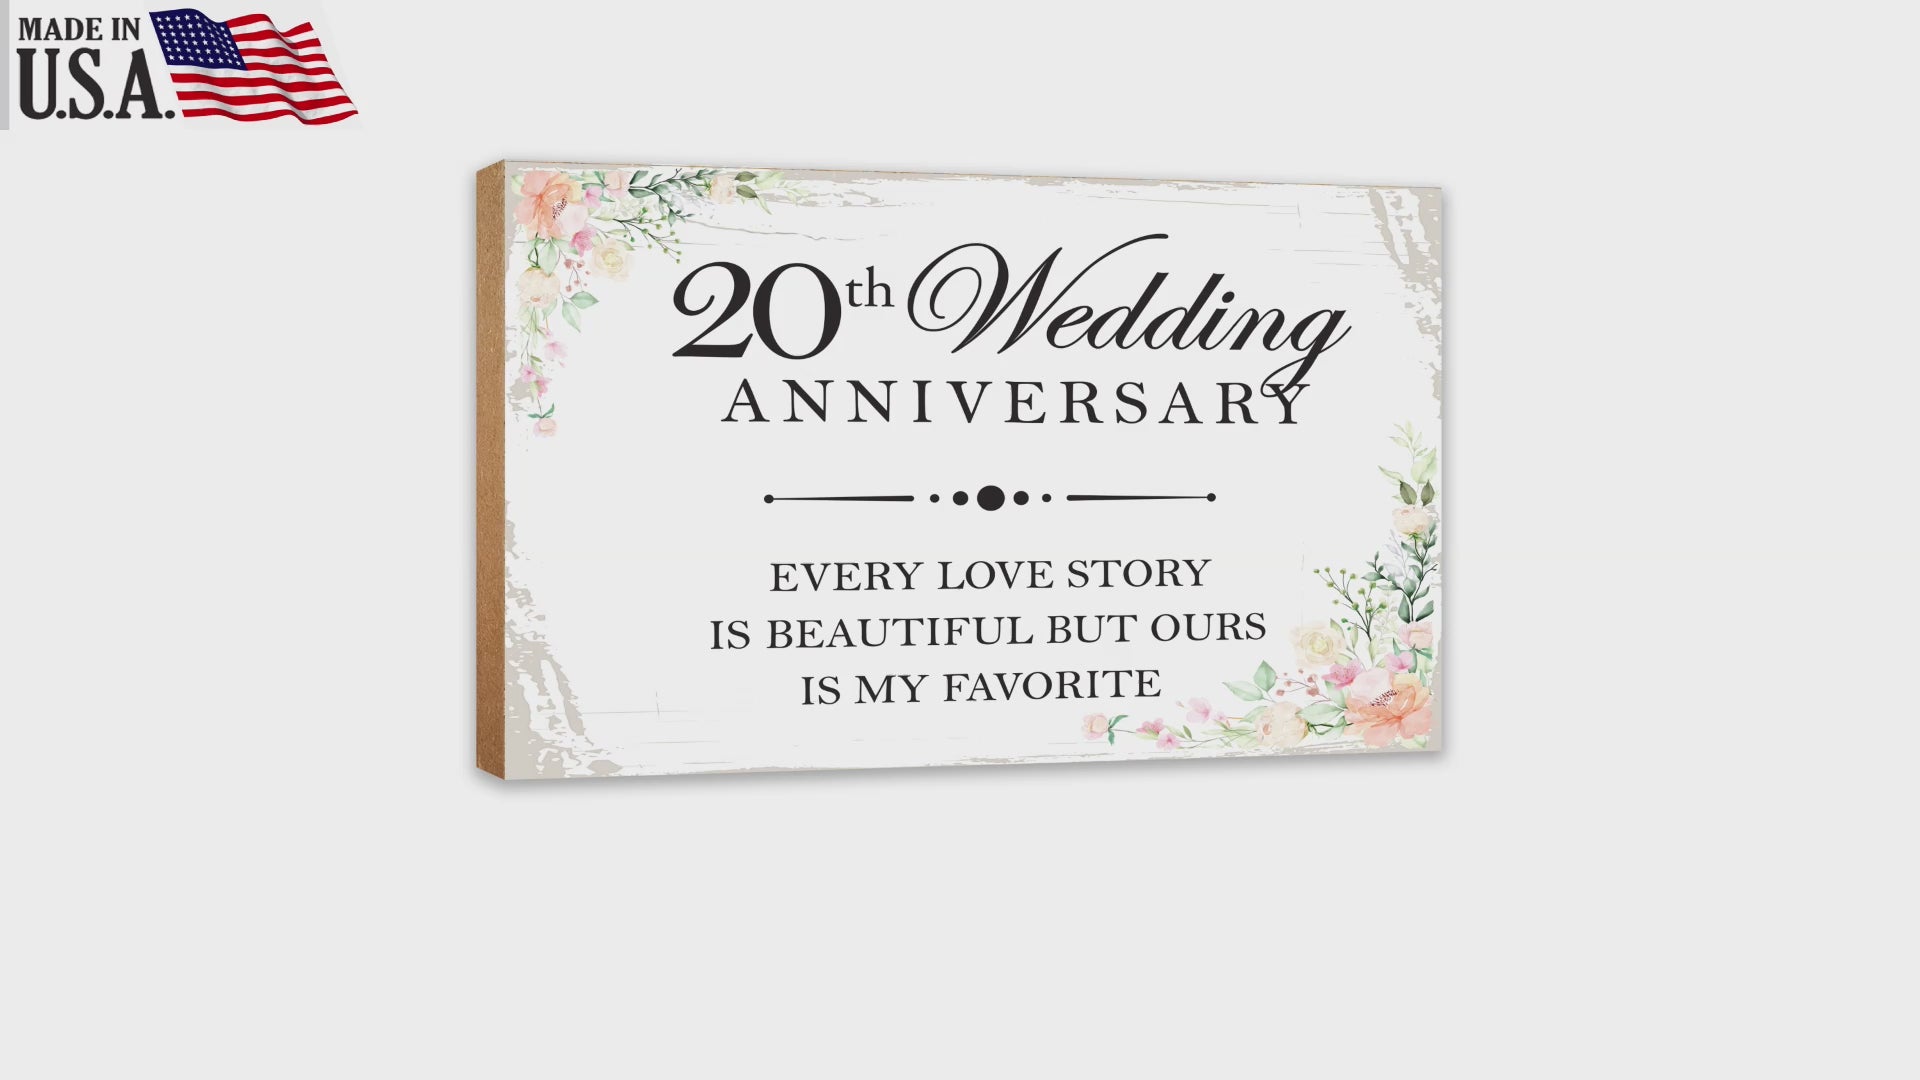 20th Wedding Anniversary Unique Shelf Decor and Tabletop Signs Gifts for Couples - Every Love Story